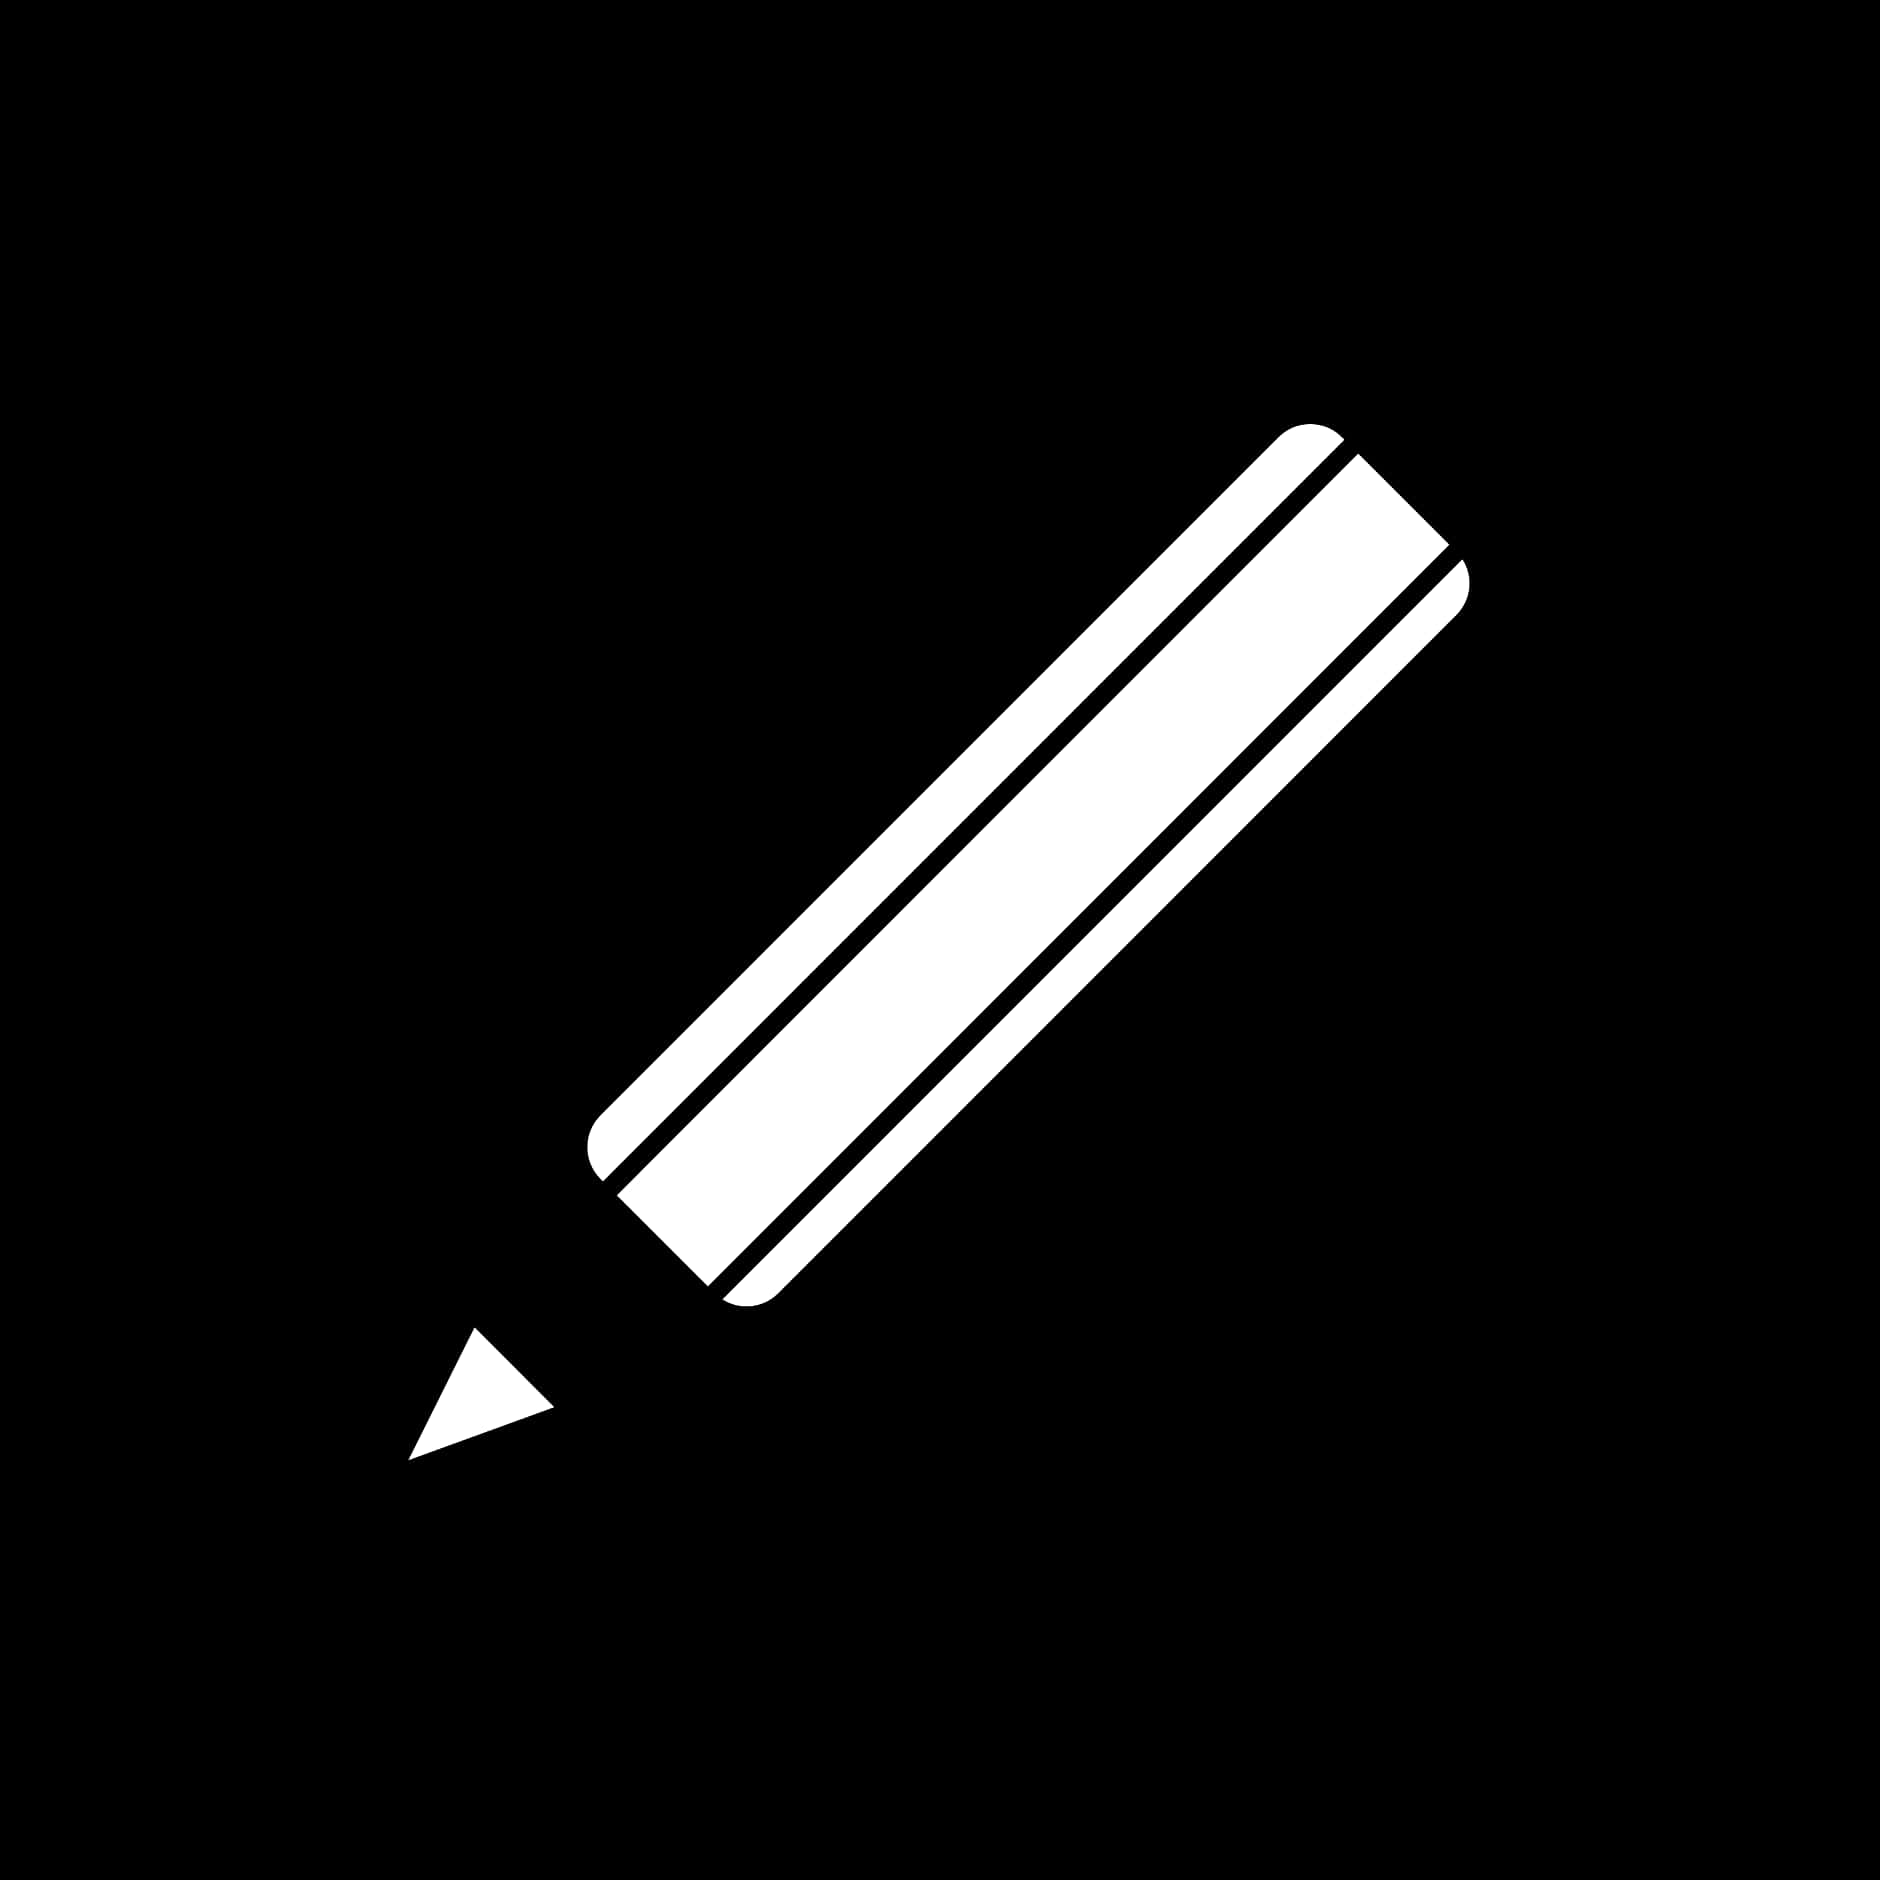 Iconic Pencil Graphic PNG